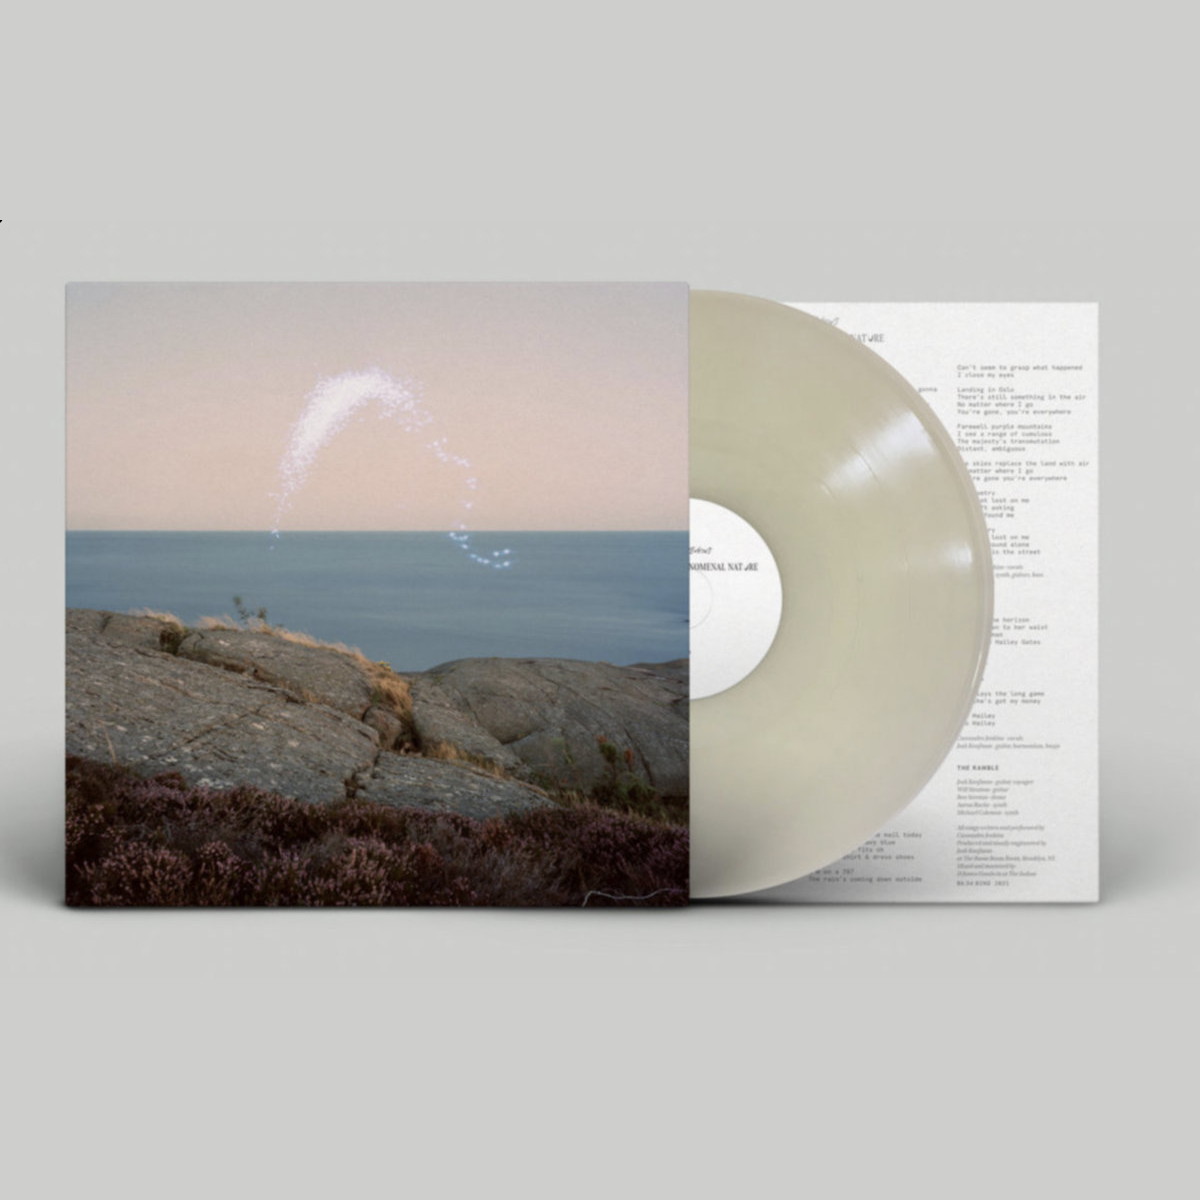 Overview On Phenomenal Nature: Limited Edition White Vinyl LP